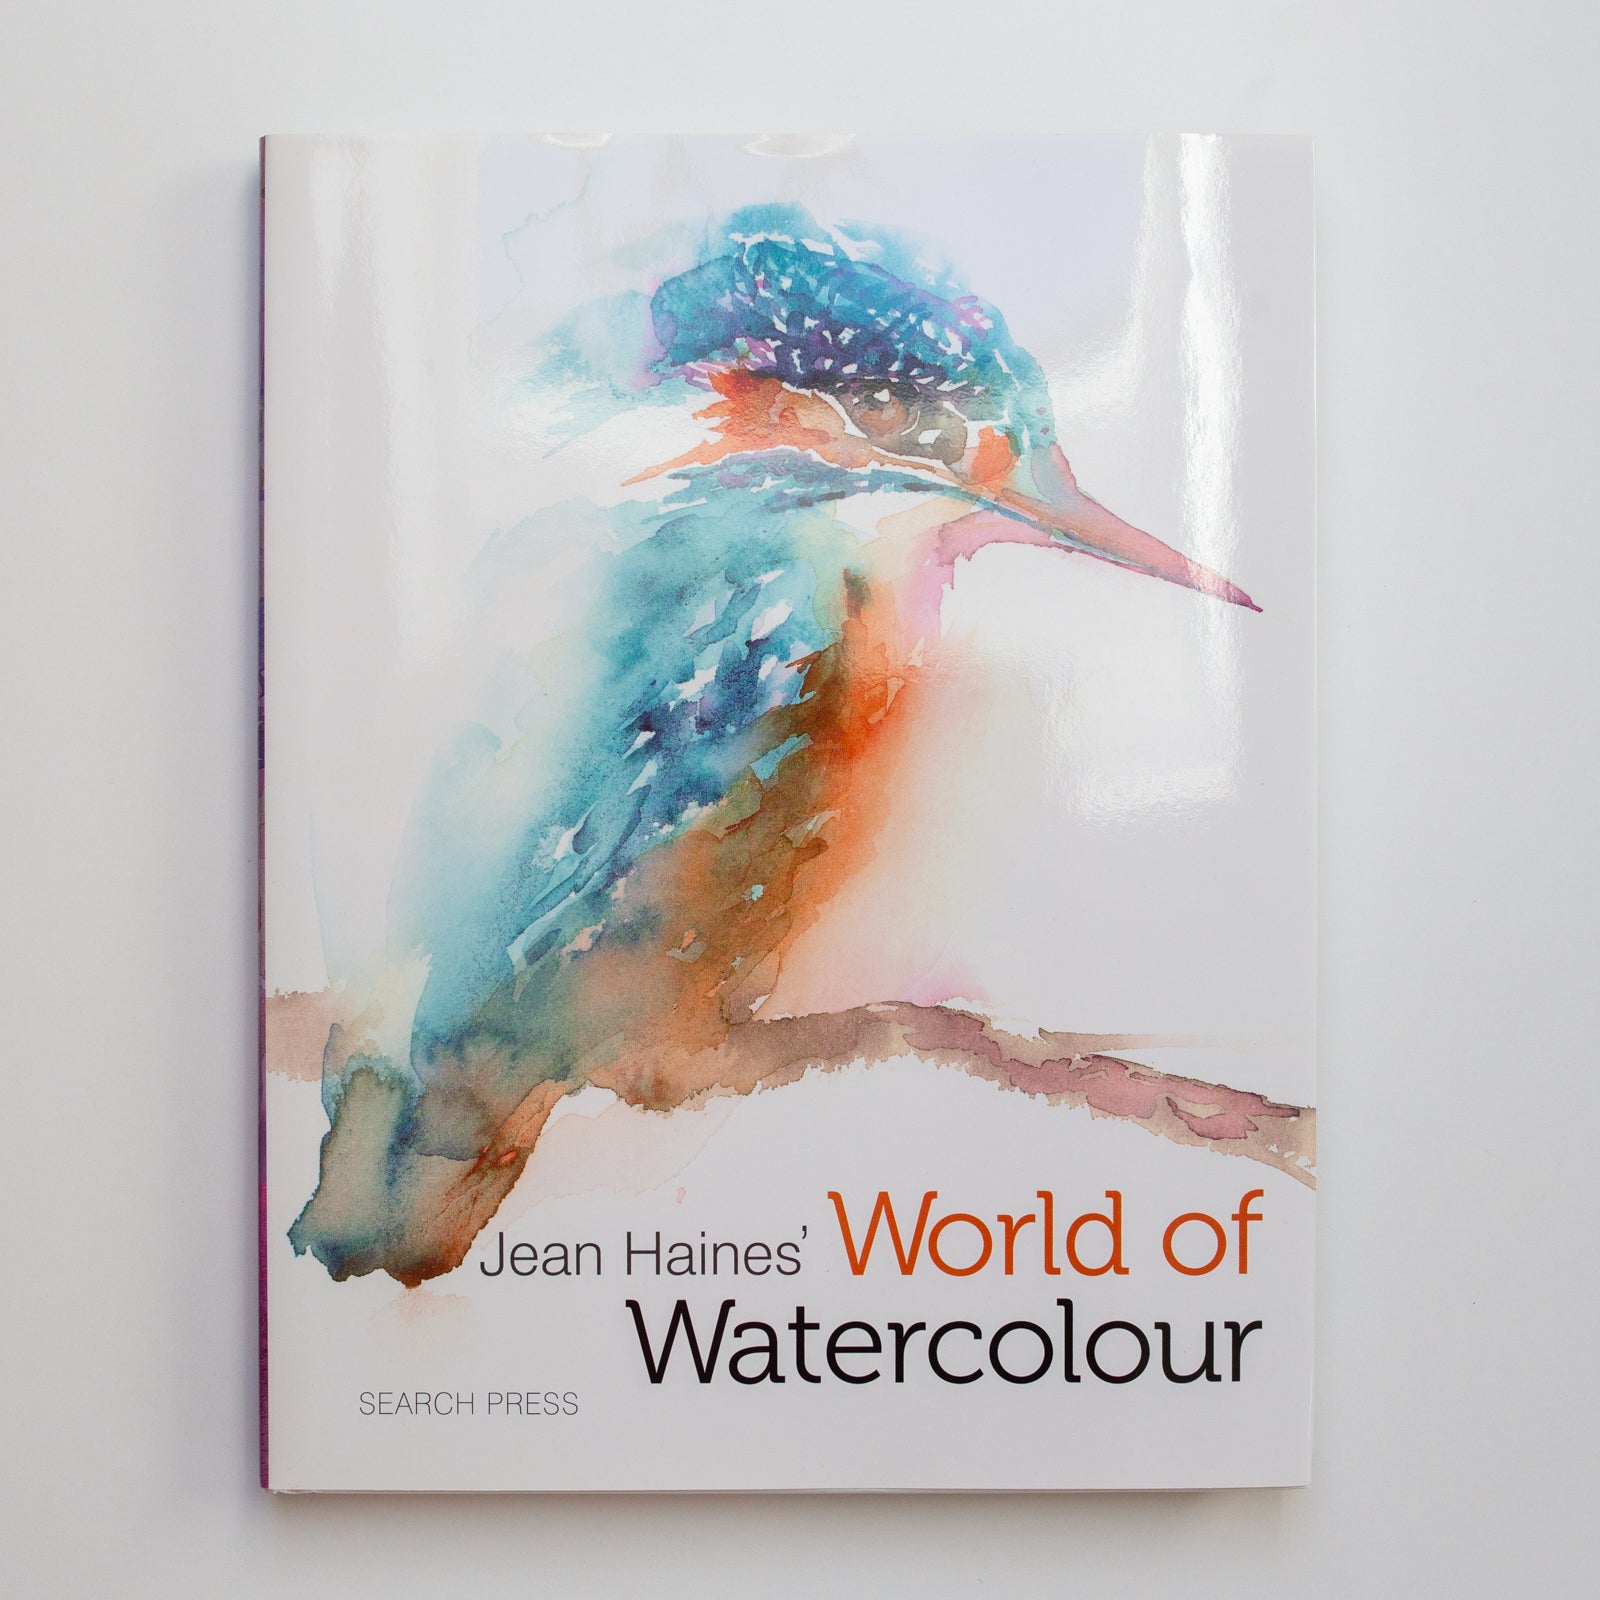 World of Watercolour by Jean Haines